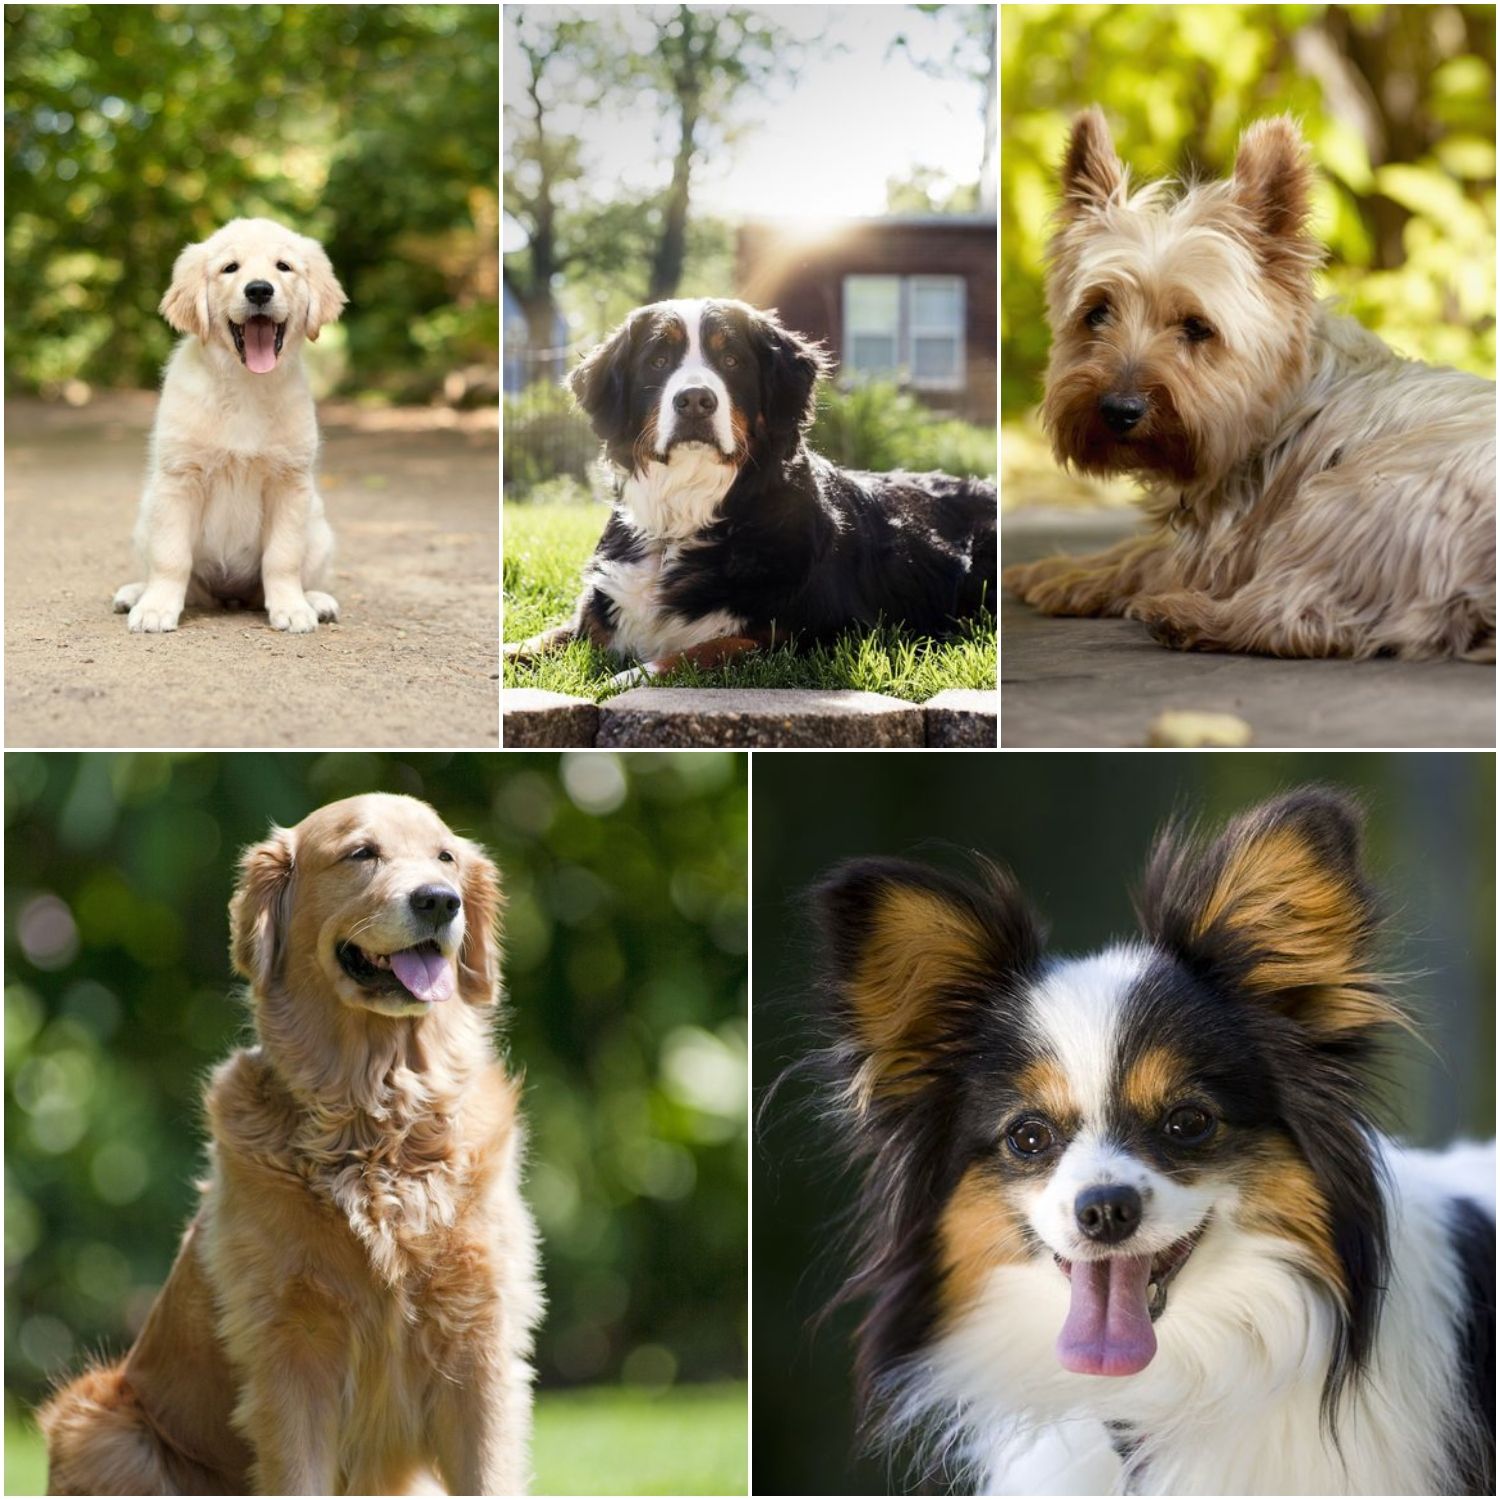 8 Dog Breeds Perfect For First-Time Owners